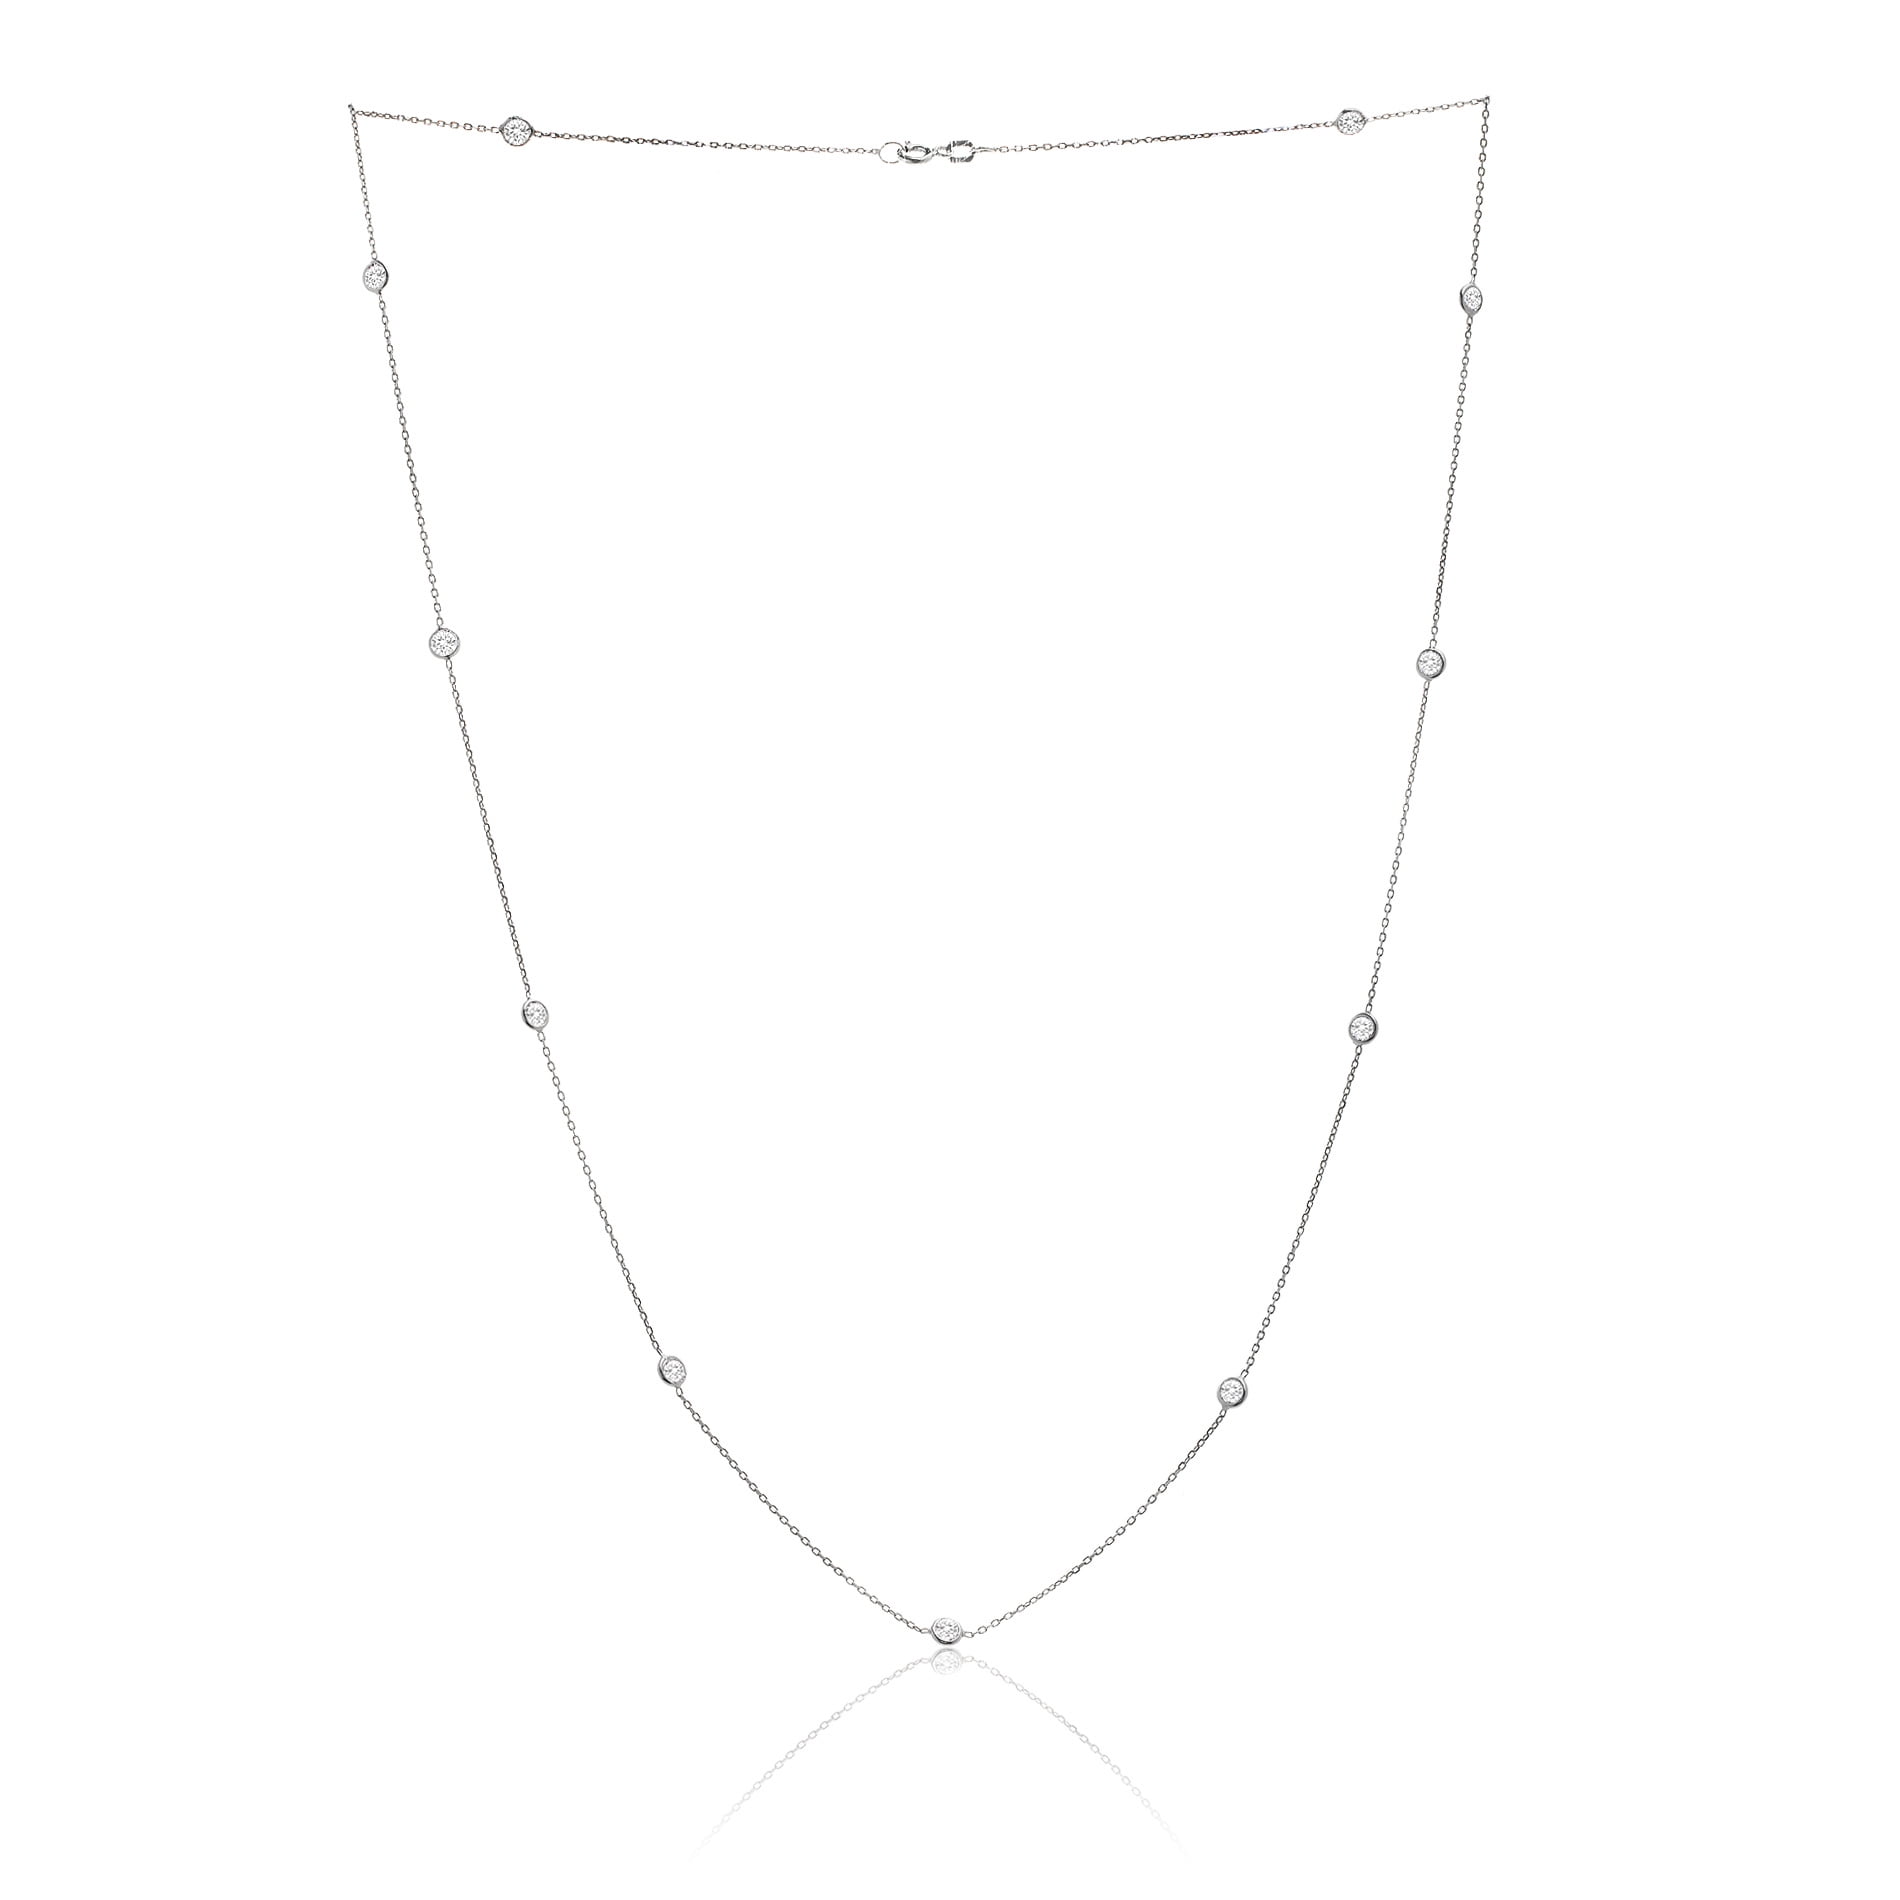 Details about   .925 Sterling Silver 1.00MM Round Box Link Chain Necklace 